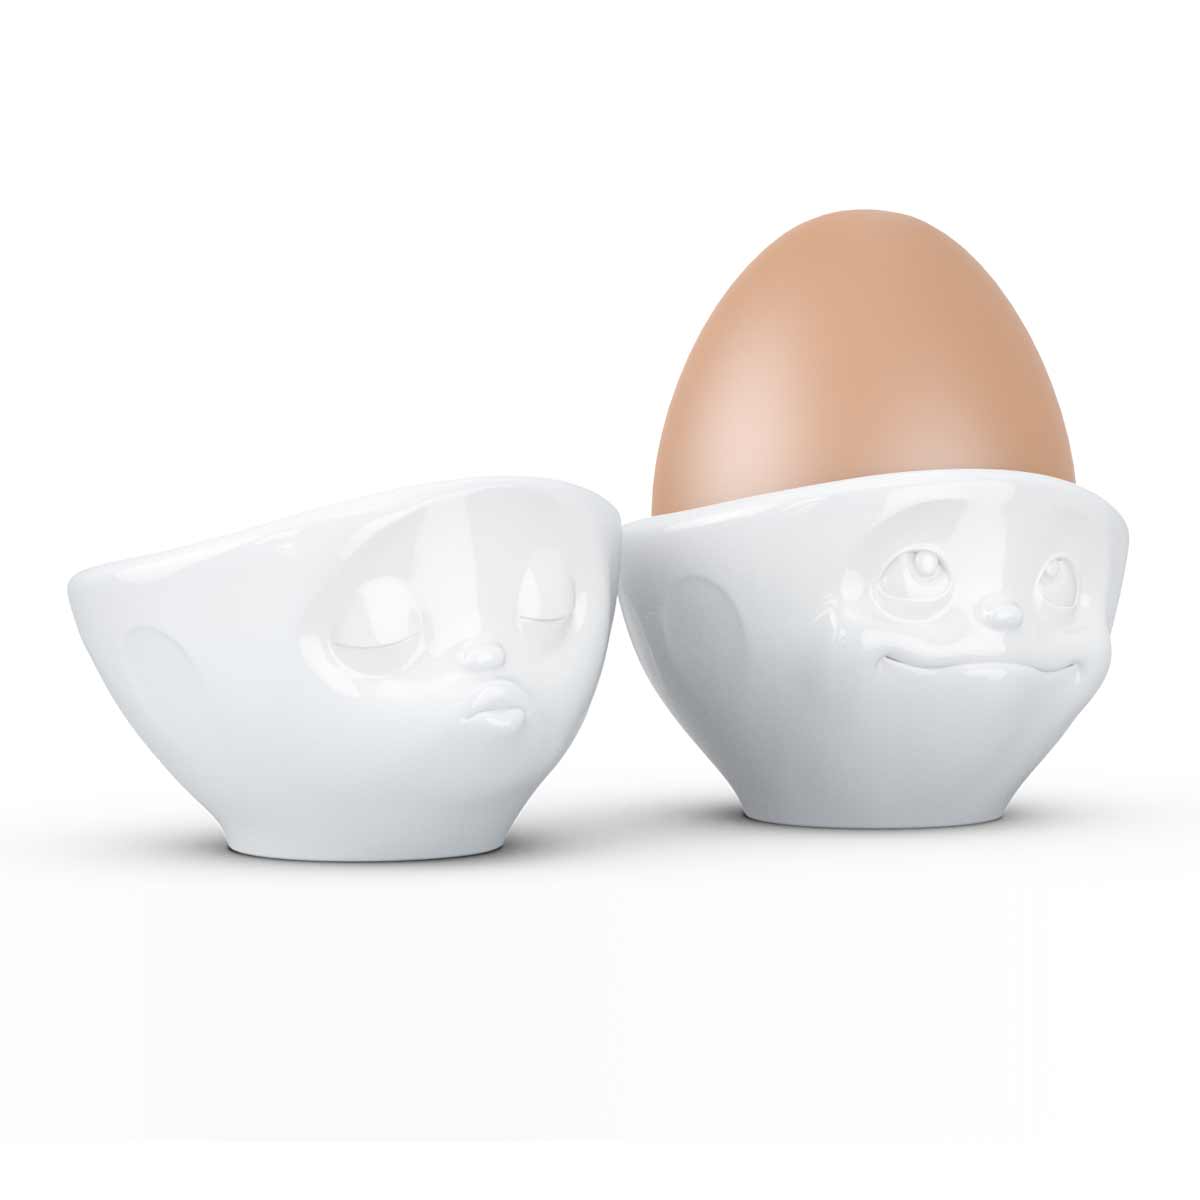 Set of 2 White Porcelain Egg Cups by Tassen - Kiss and Dreamy